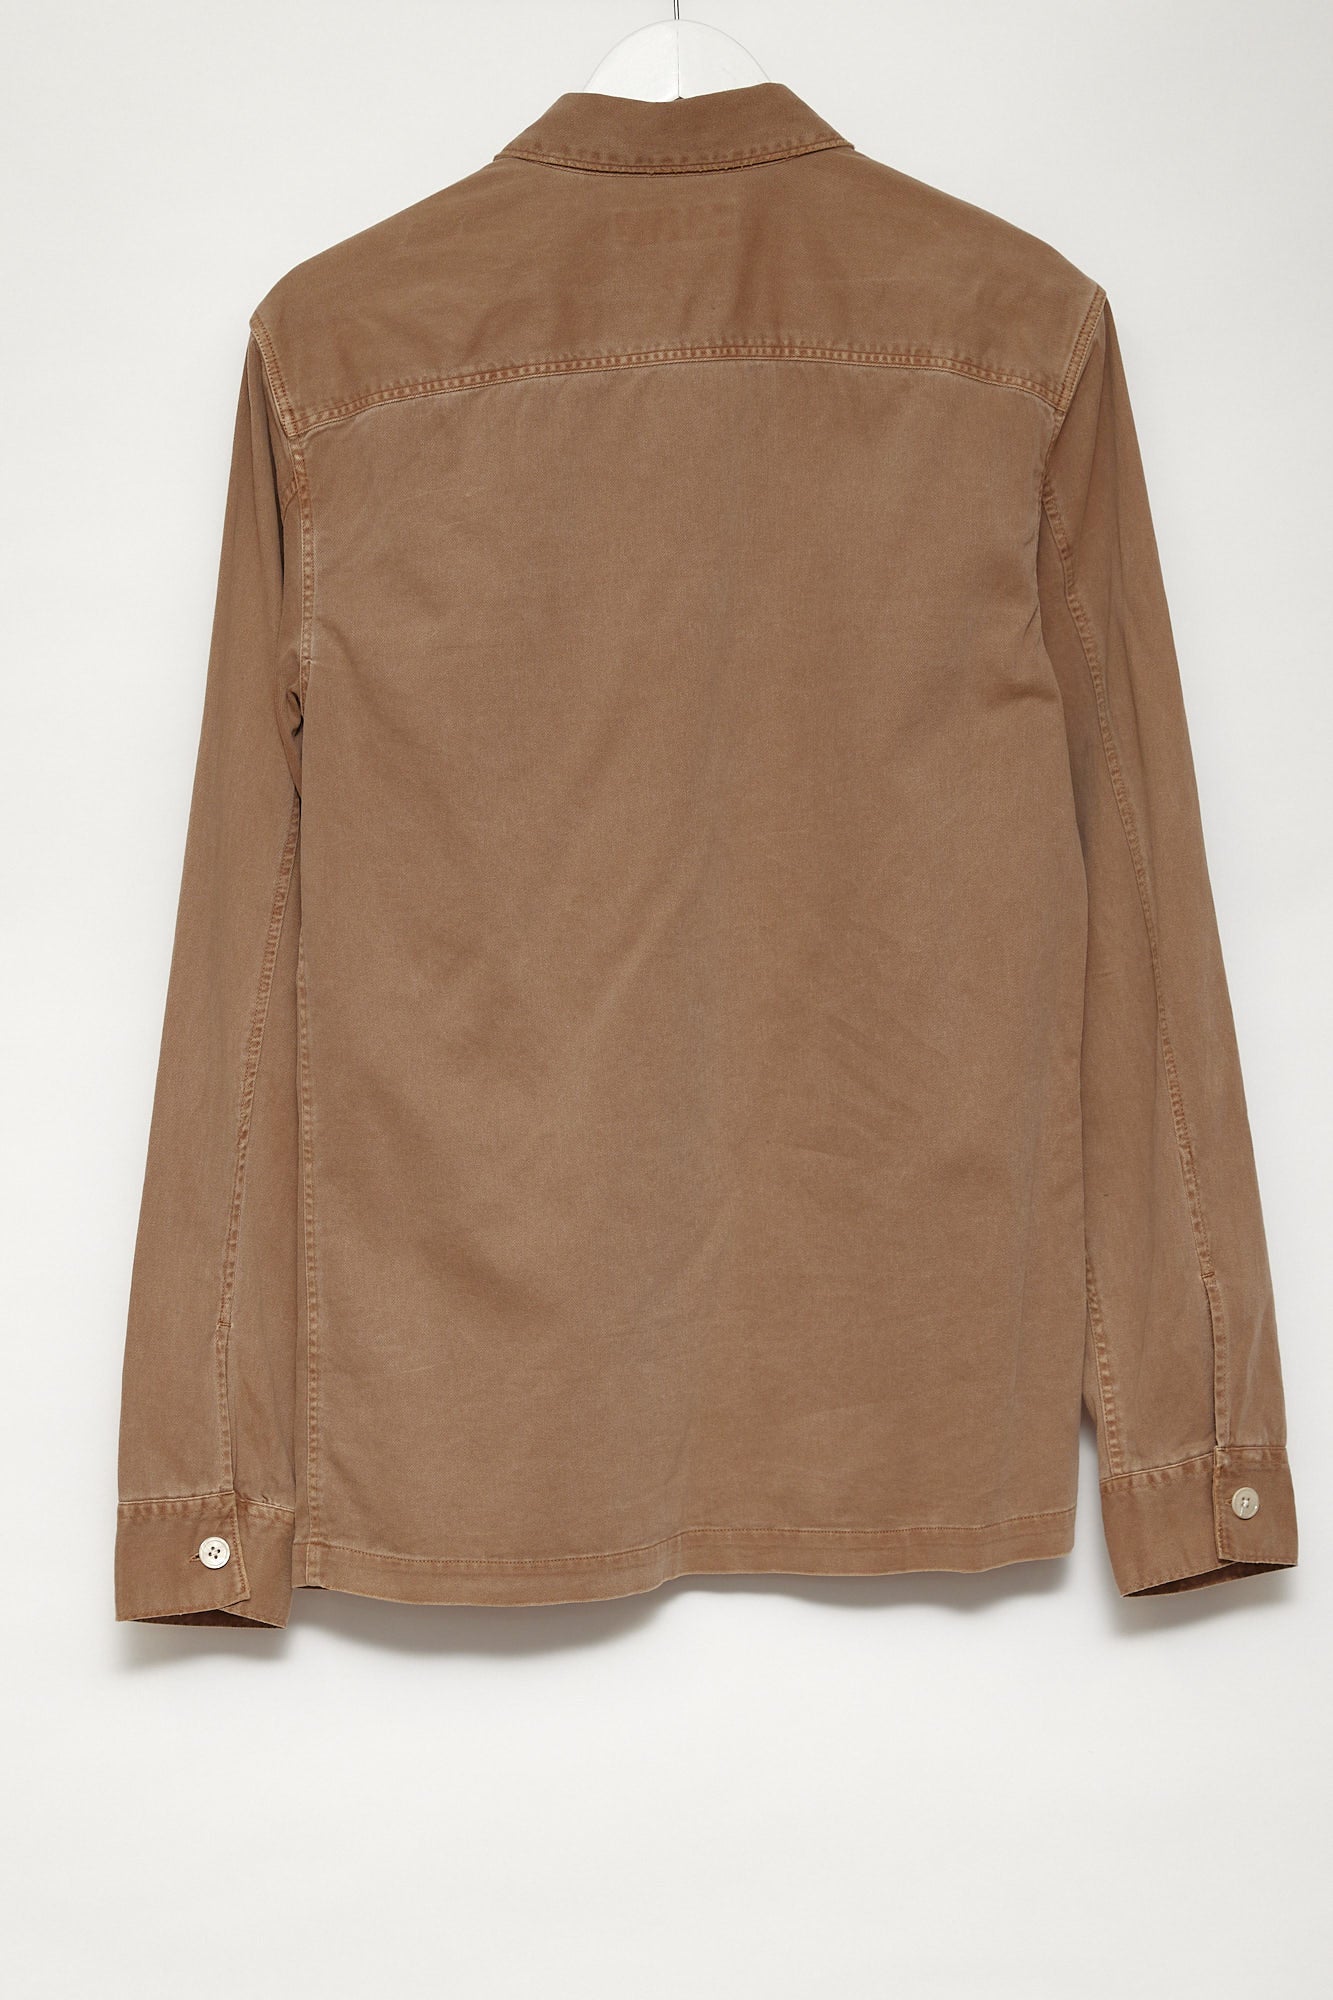 Mens All Saints Brown Over shirt size small